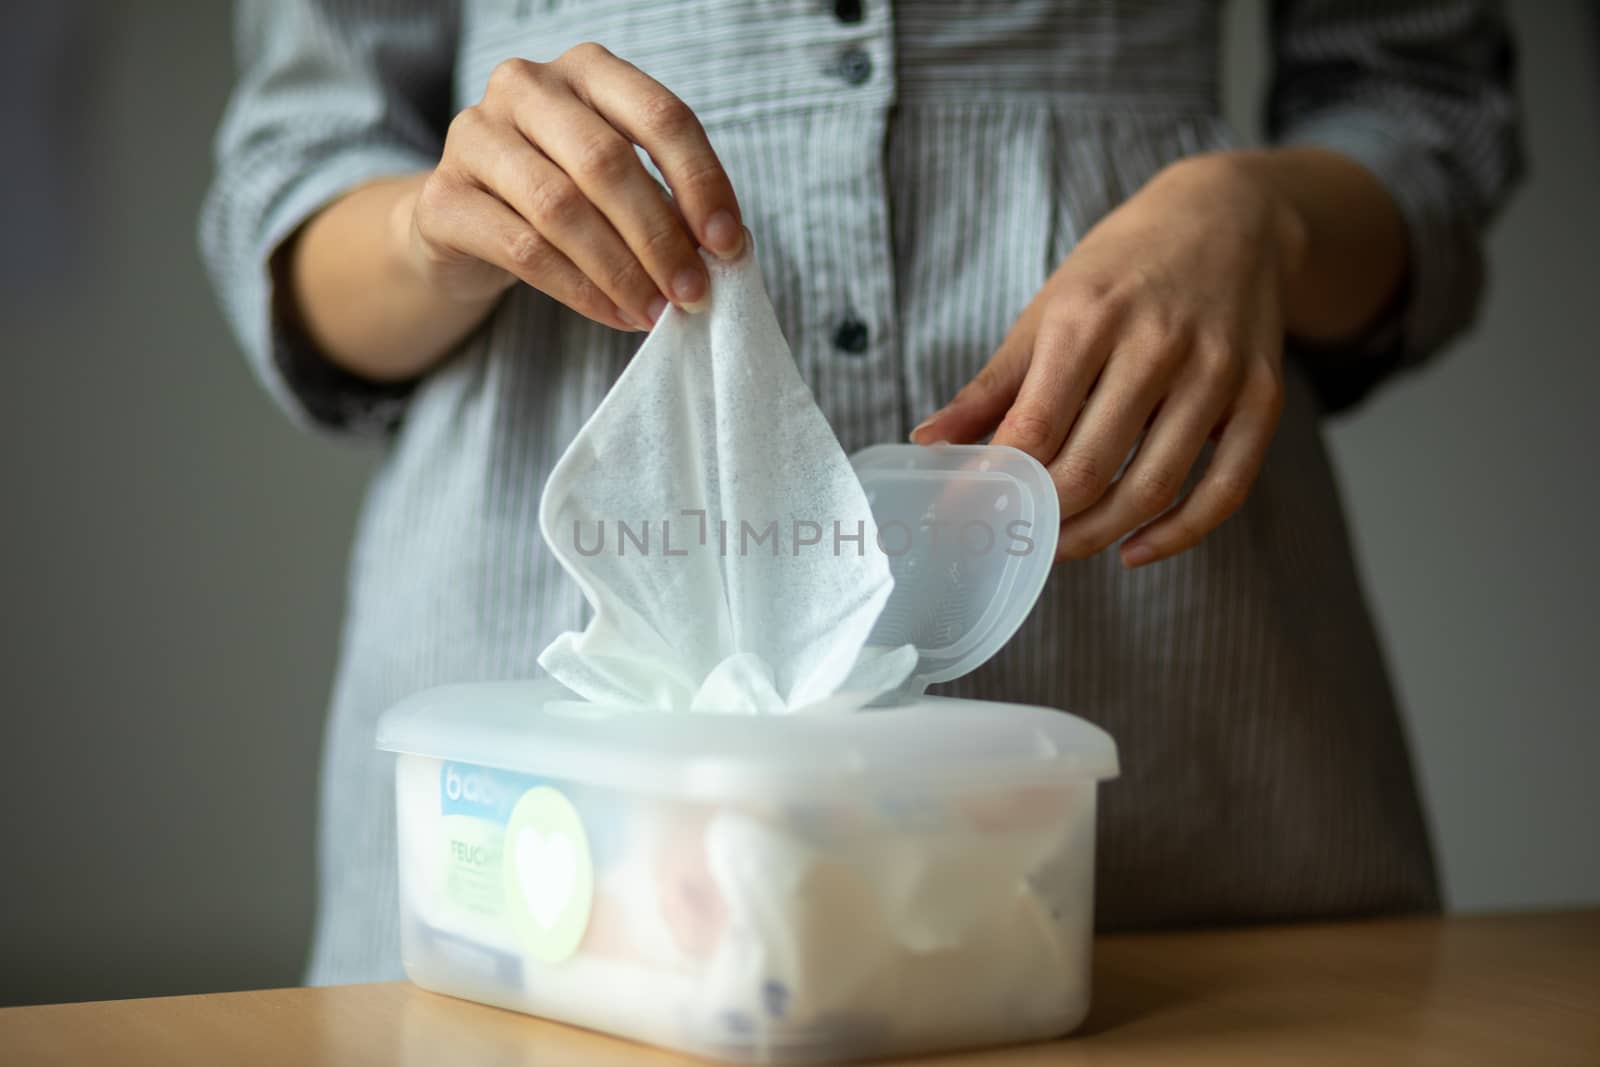 Wet wipes are universal an practical: woman hand take one wipe from big plastic box package for cleaning, home, indoor